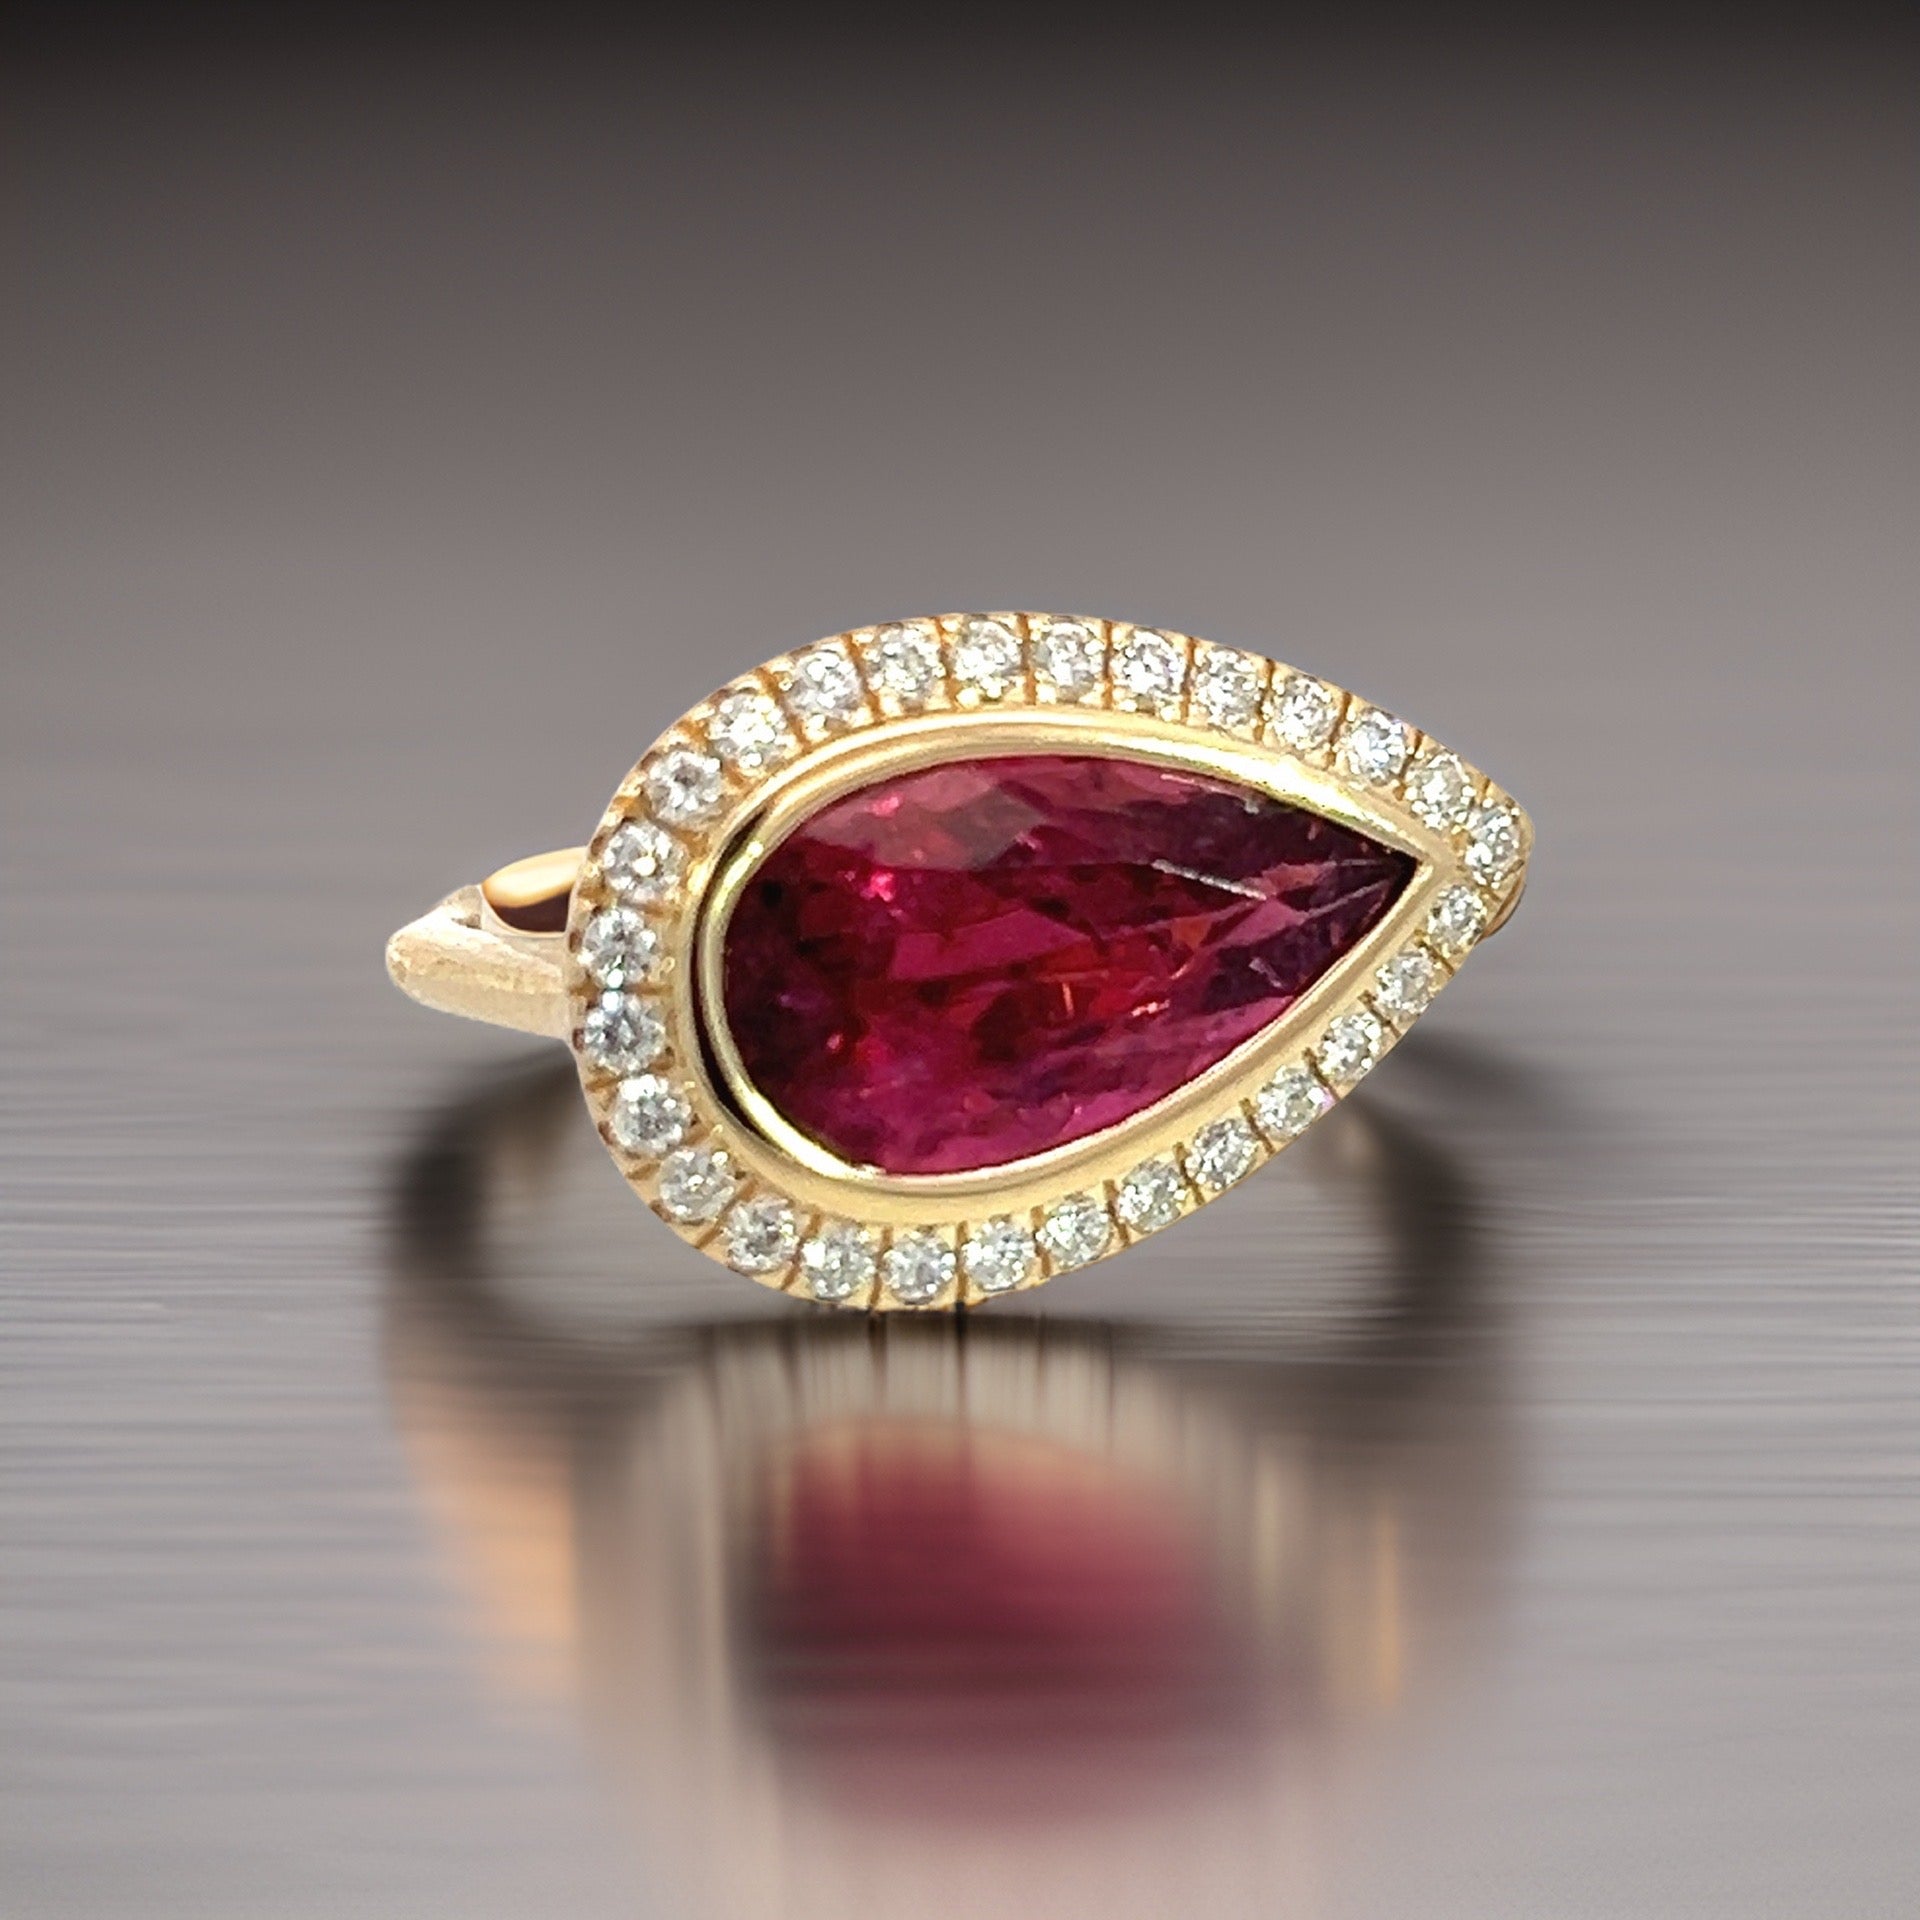 Natural Rubellite Diamond Ring 6.5 14k Y Gold 4.68 TCW Certified $5,950 310648 - Certified Fine Jewelry